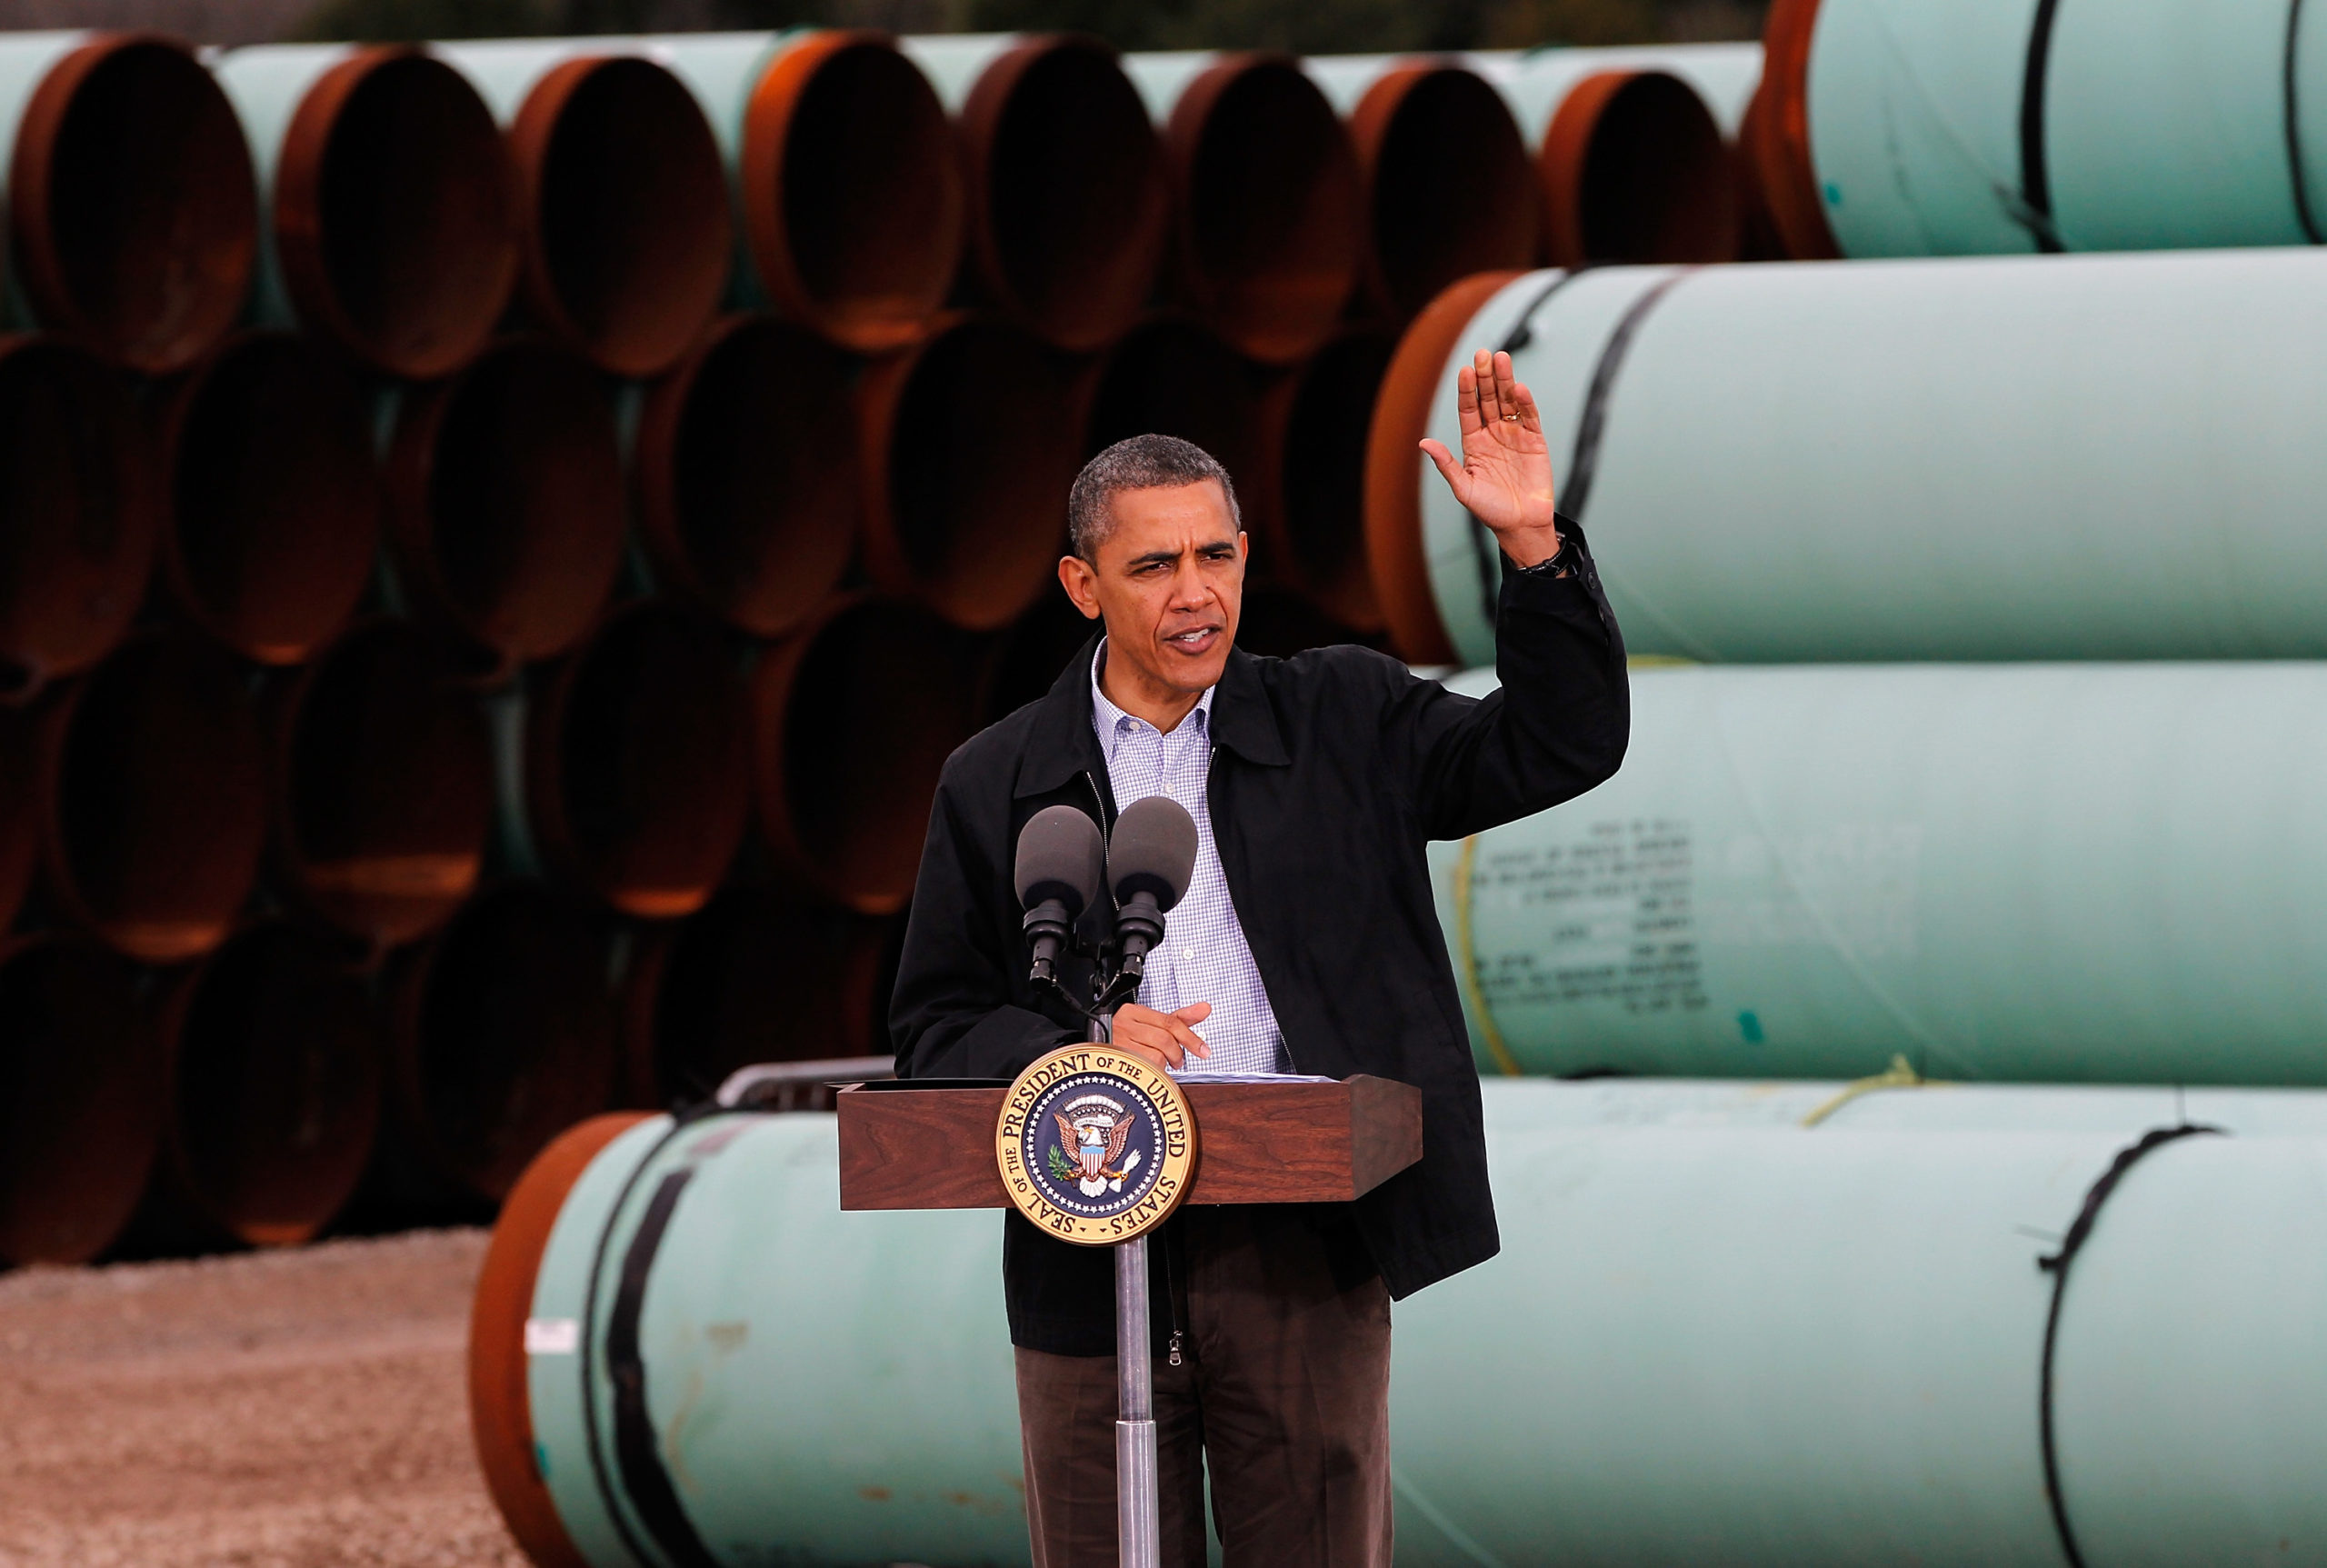 Former President Barack Obama speaks at the southern site of the Keystone XL Pipeline on March 22, 2012 in Cushing, Oklahoma. (Tom Pennington/Getty Images)